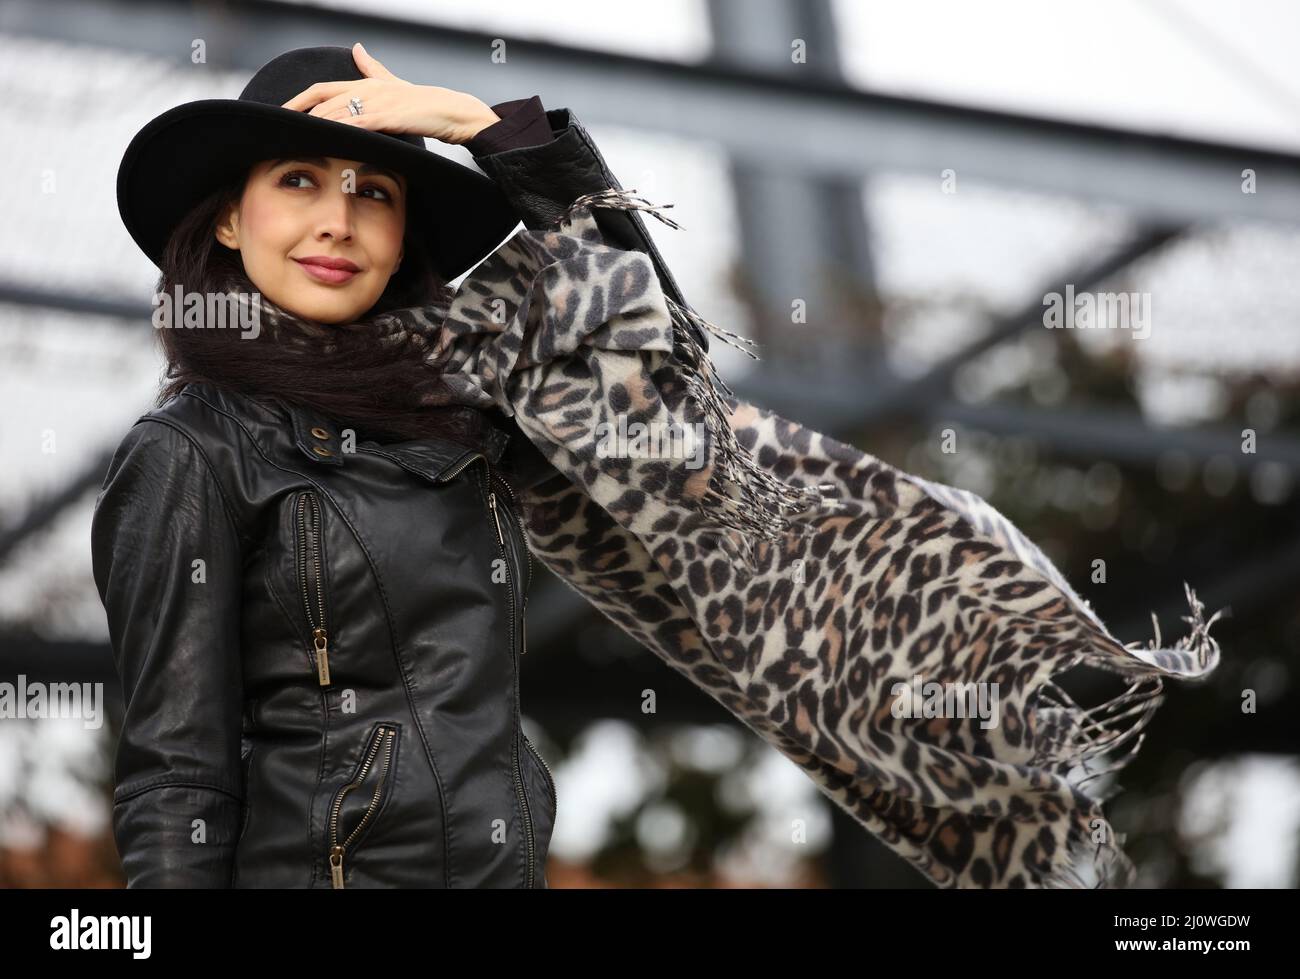 Beautiful fashionable woman holding her hat on a very windy day, scarf is flying in the air. Stock Photo